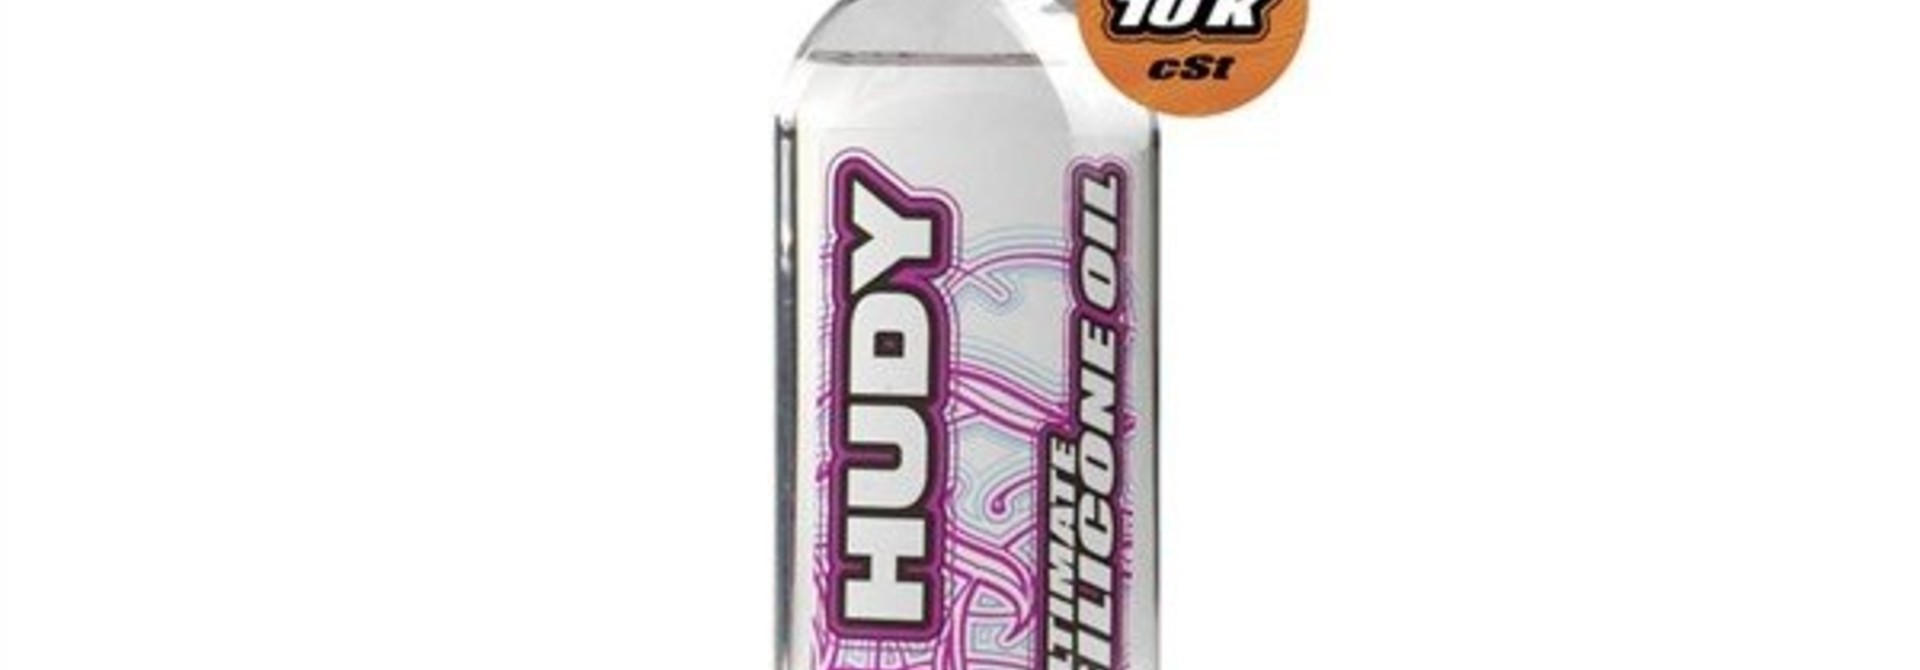 HUDY ULTIMATE SILICONE OIL 10 000 cSt - 100ML. H106511